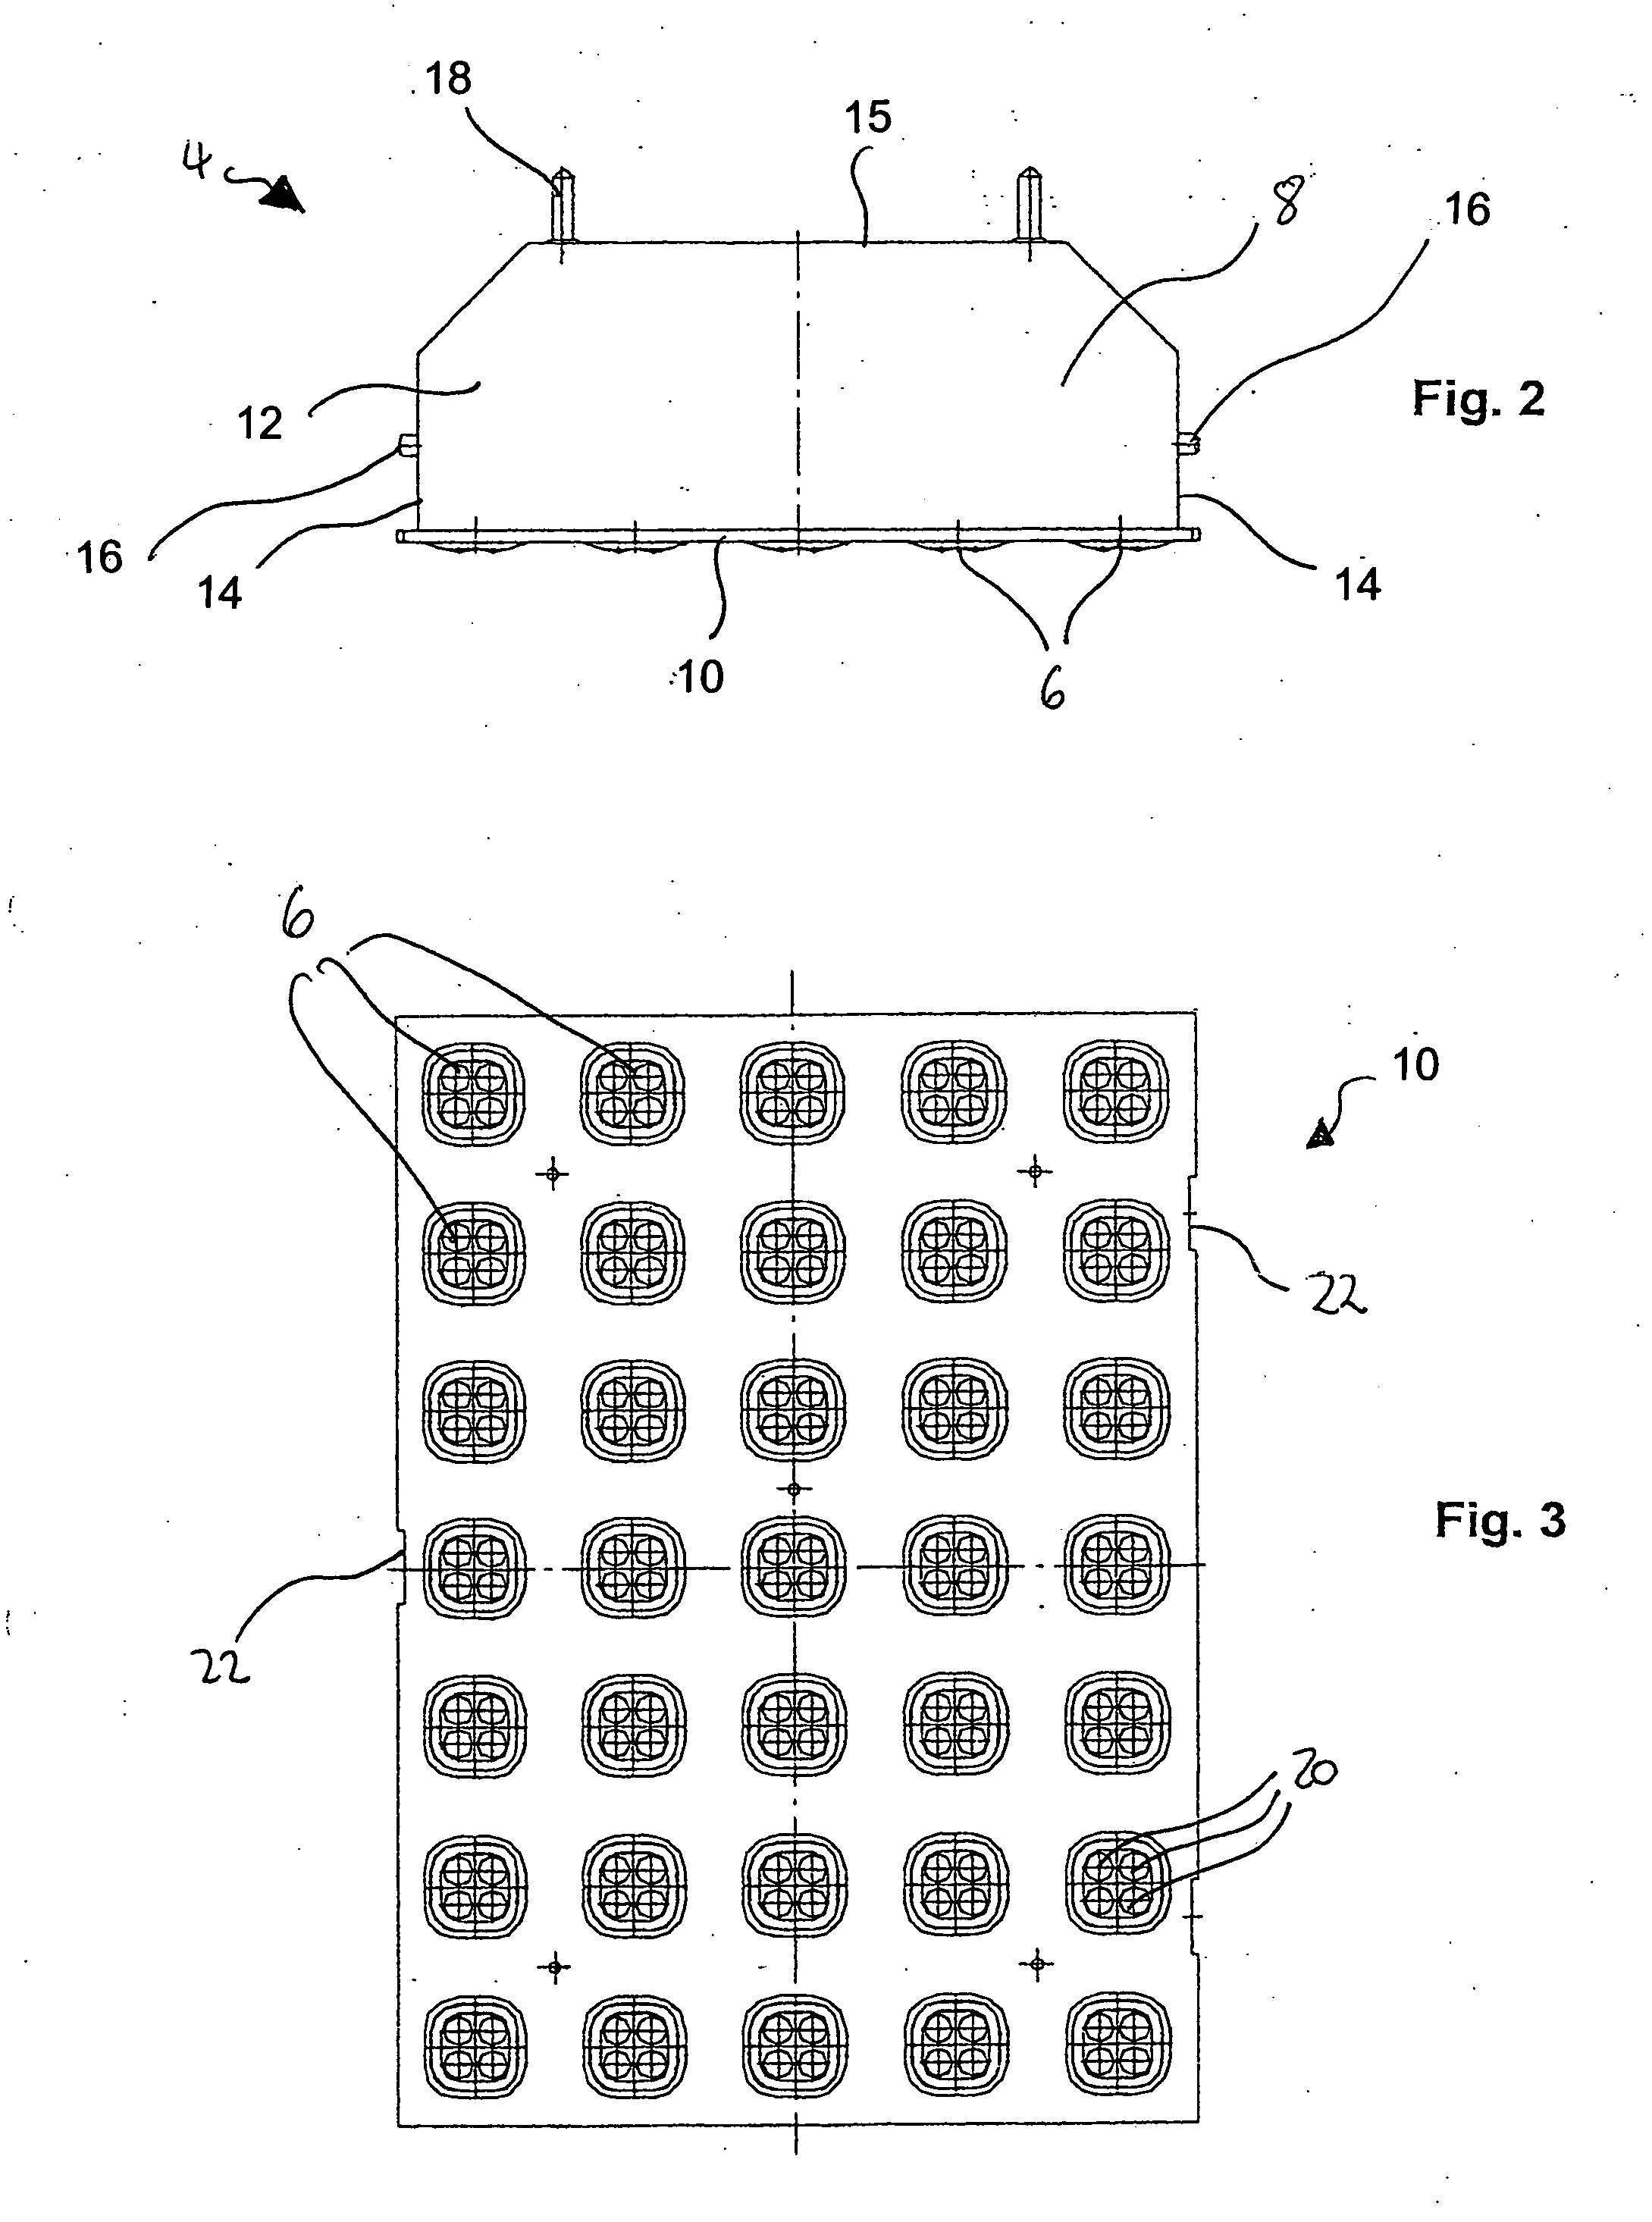 Modular display device and tool for removing display modules